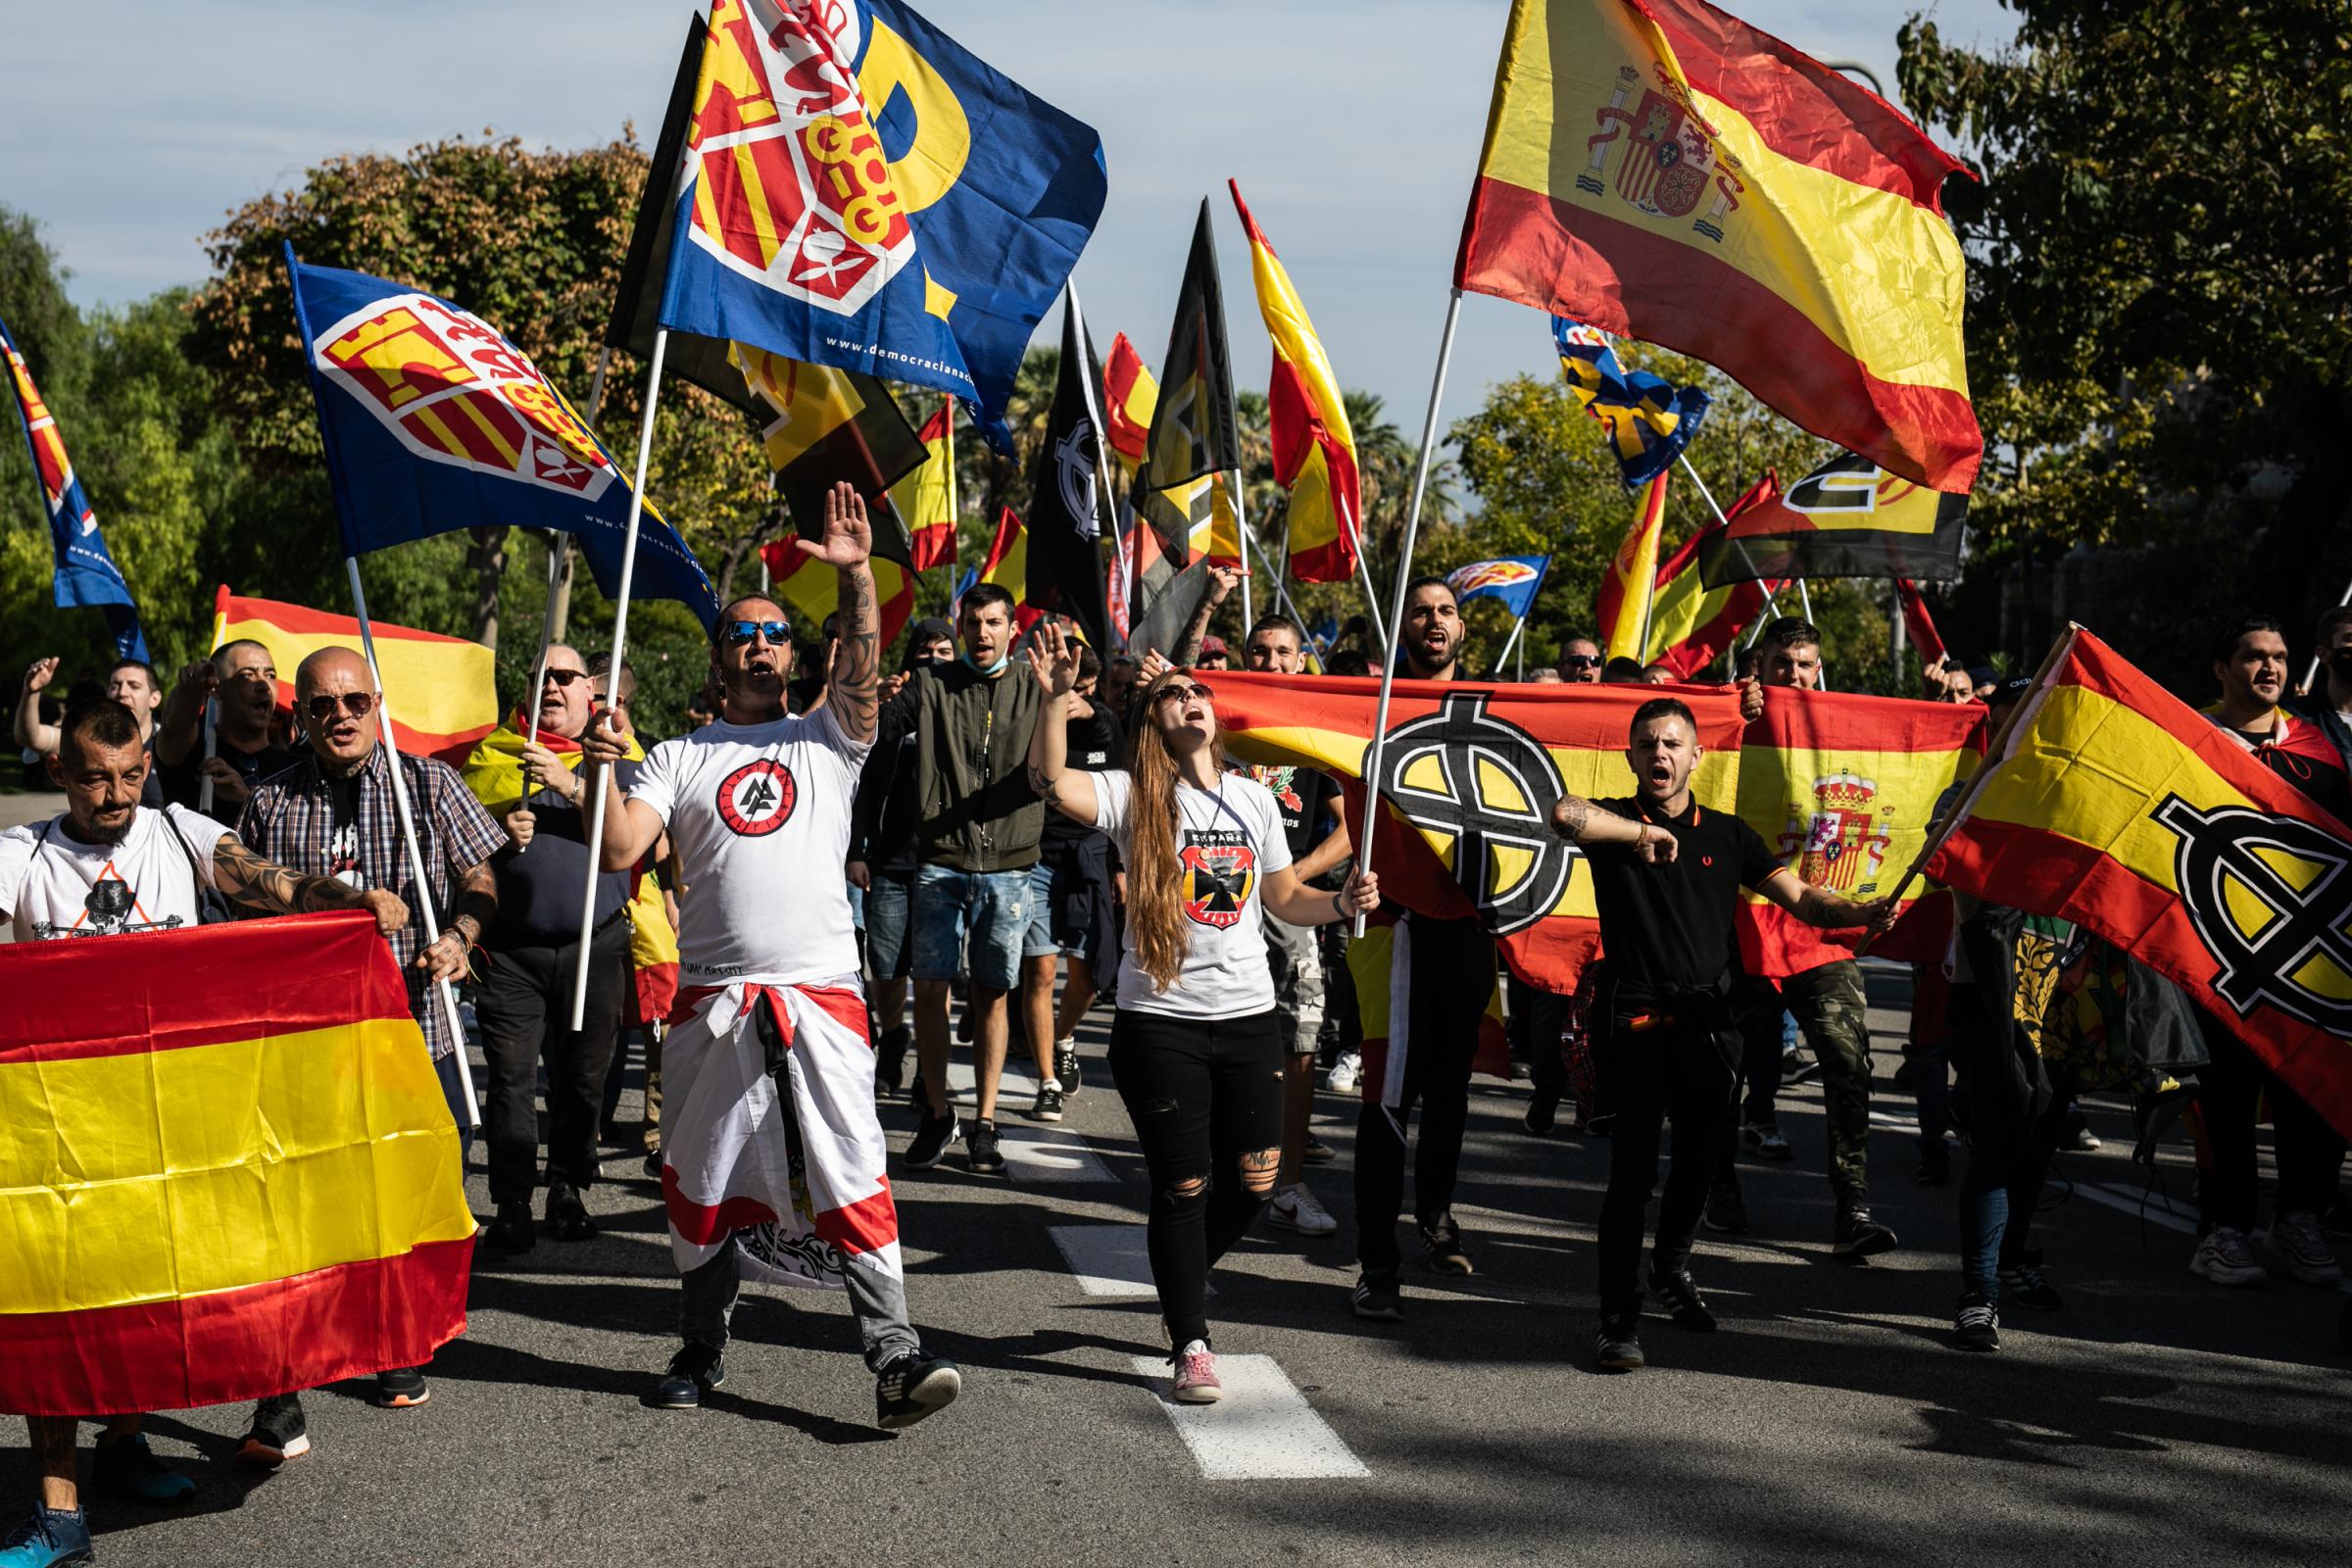 Spain's National Day Overshadowed By Colonialist Past  - BARCELONA, SPAIN - OCTOBER 12: A person makes the Nazi...